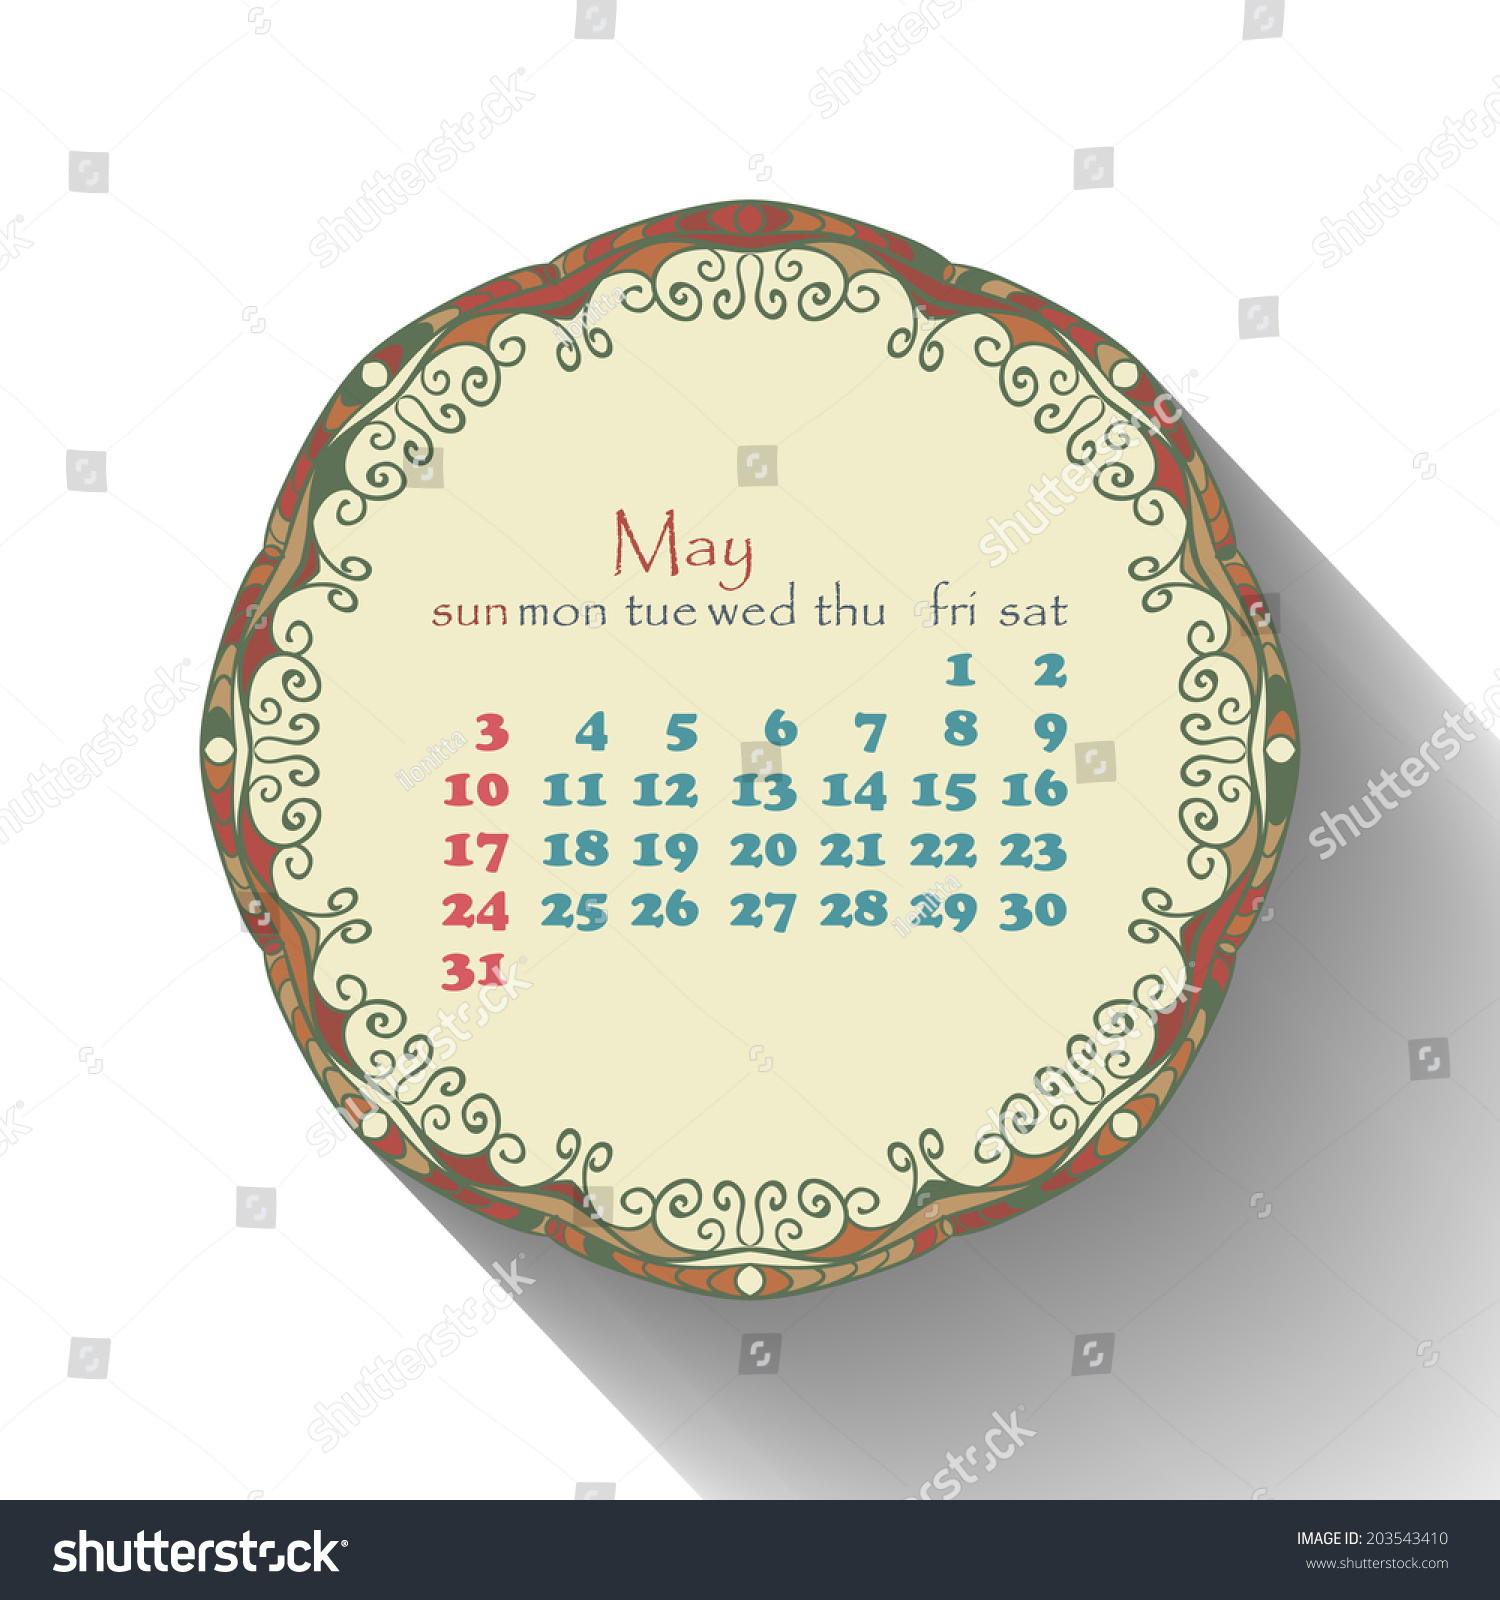 Calendar Month Of May 2015 In English. Arabic, Ethnic Style. Stock